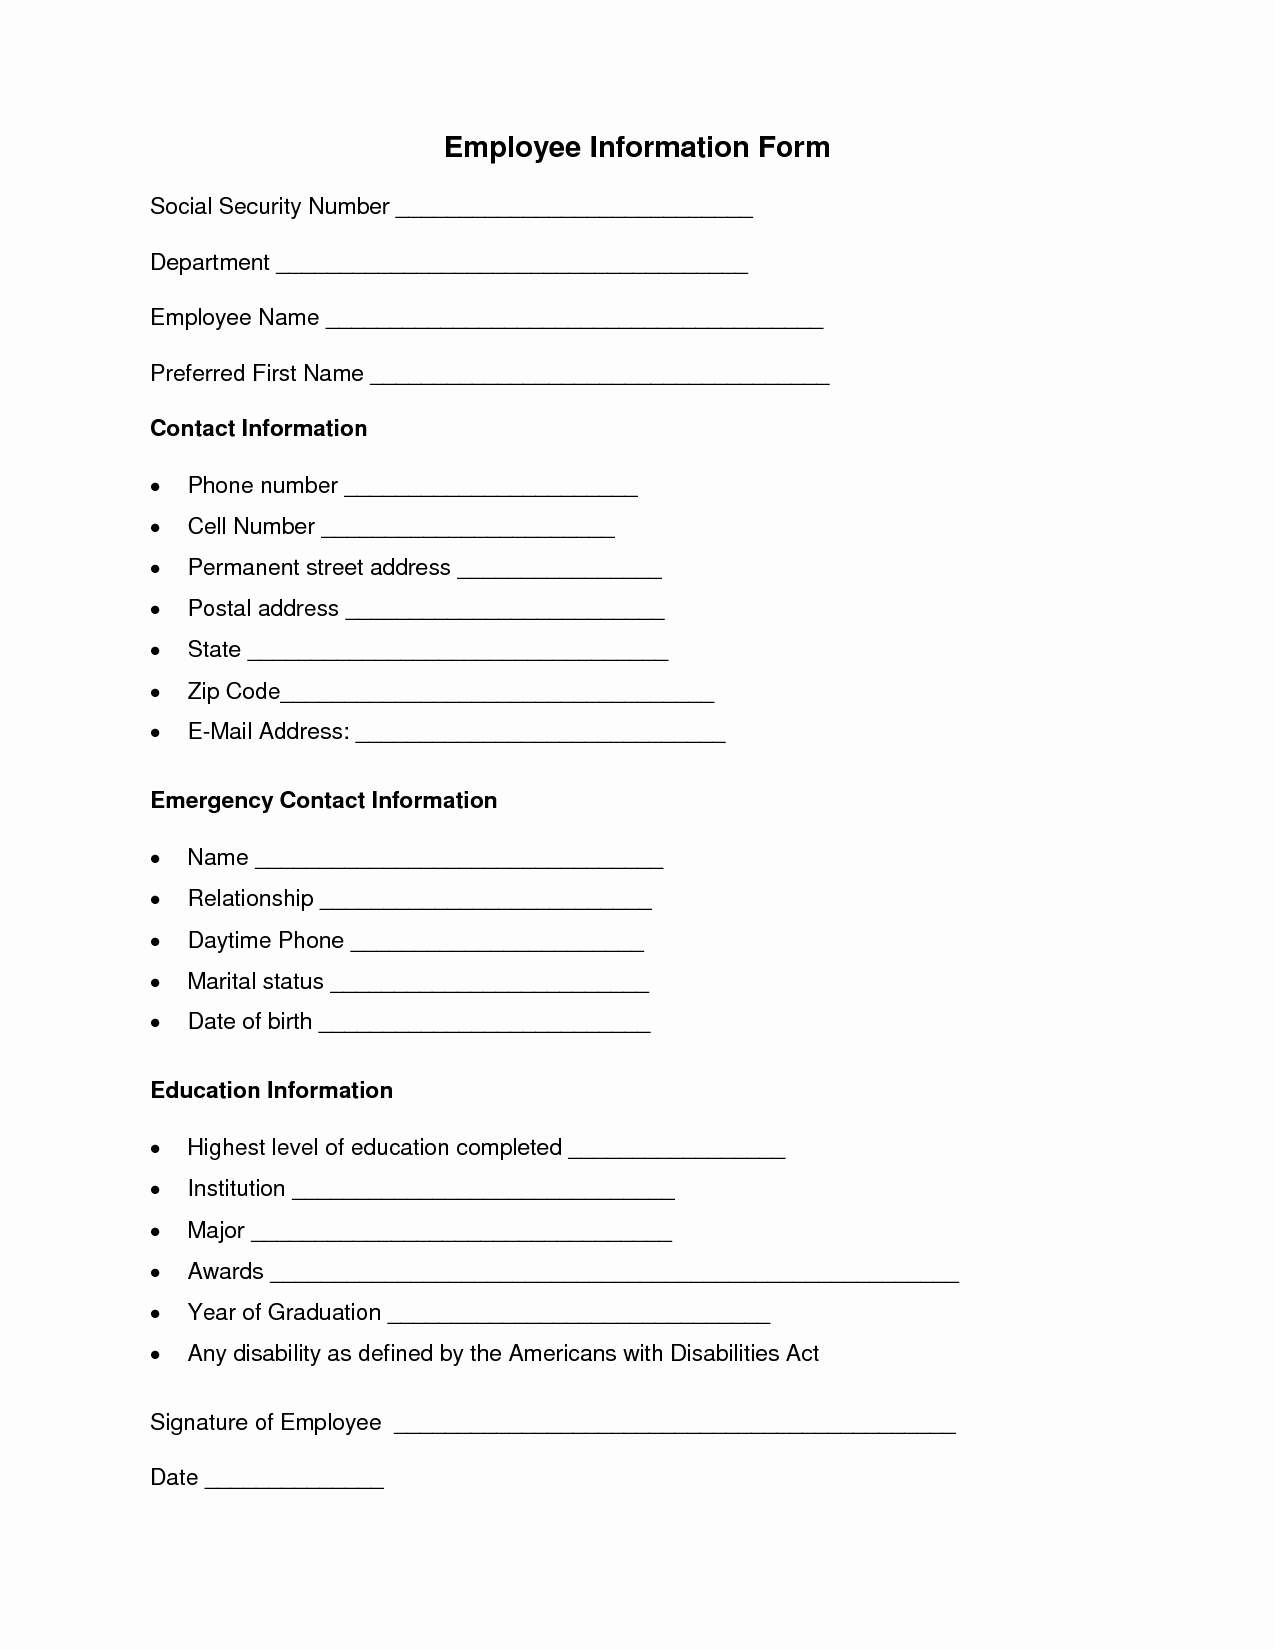 Employee Contact Information Template New Employee Information form …